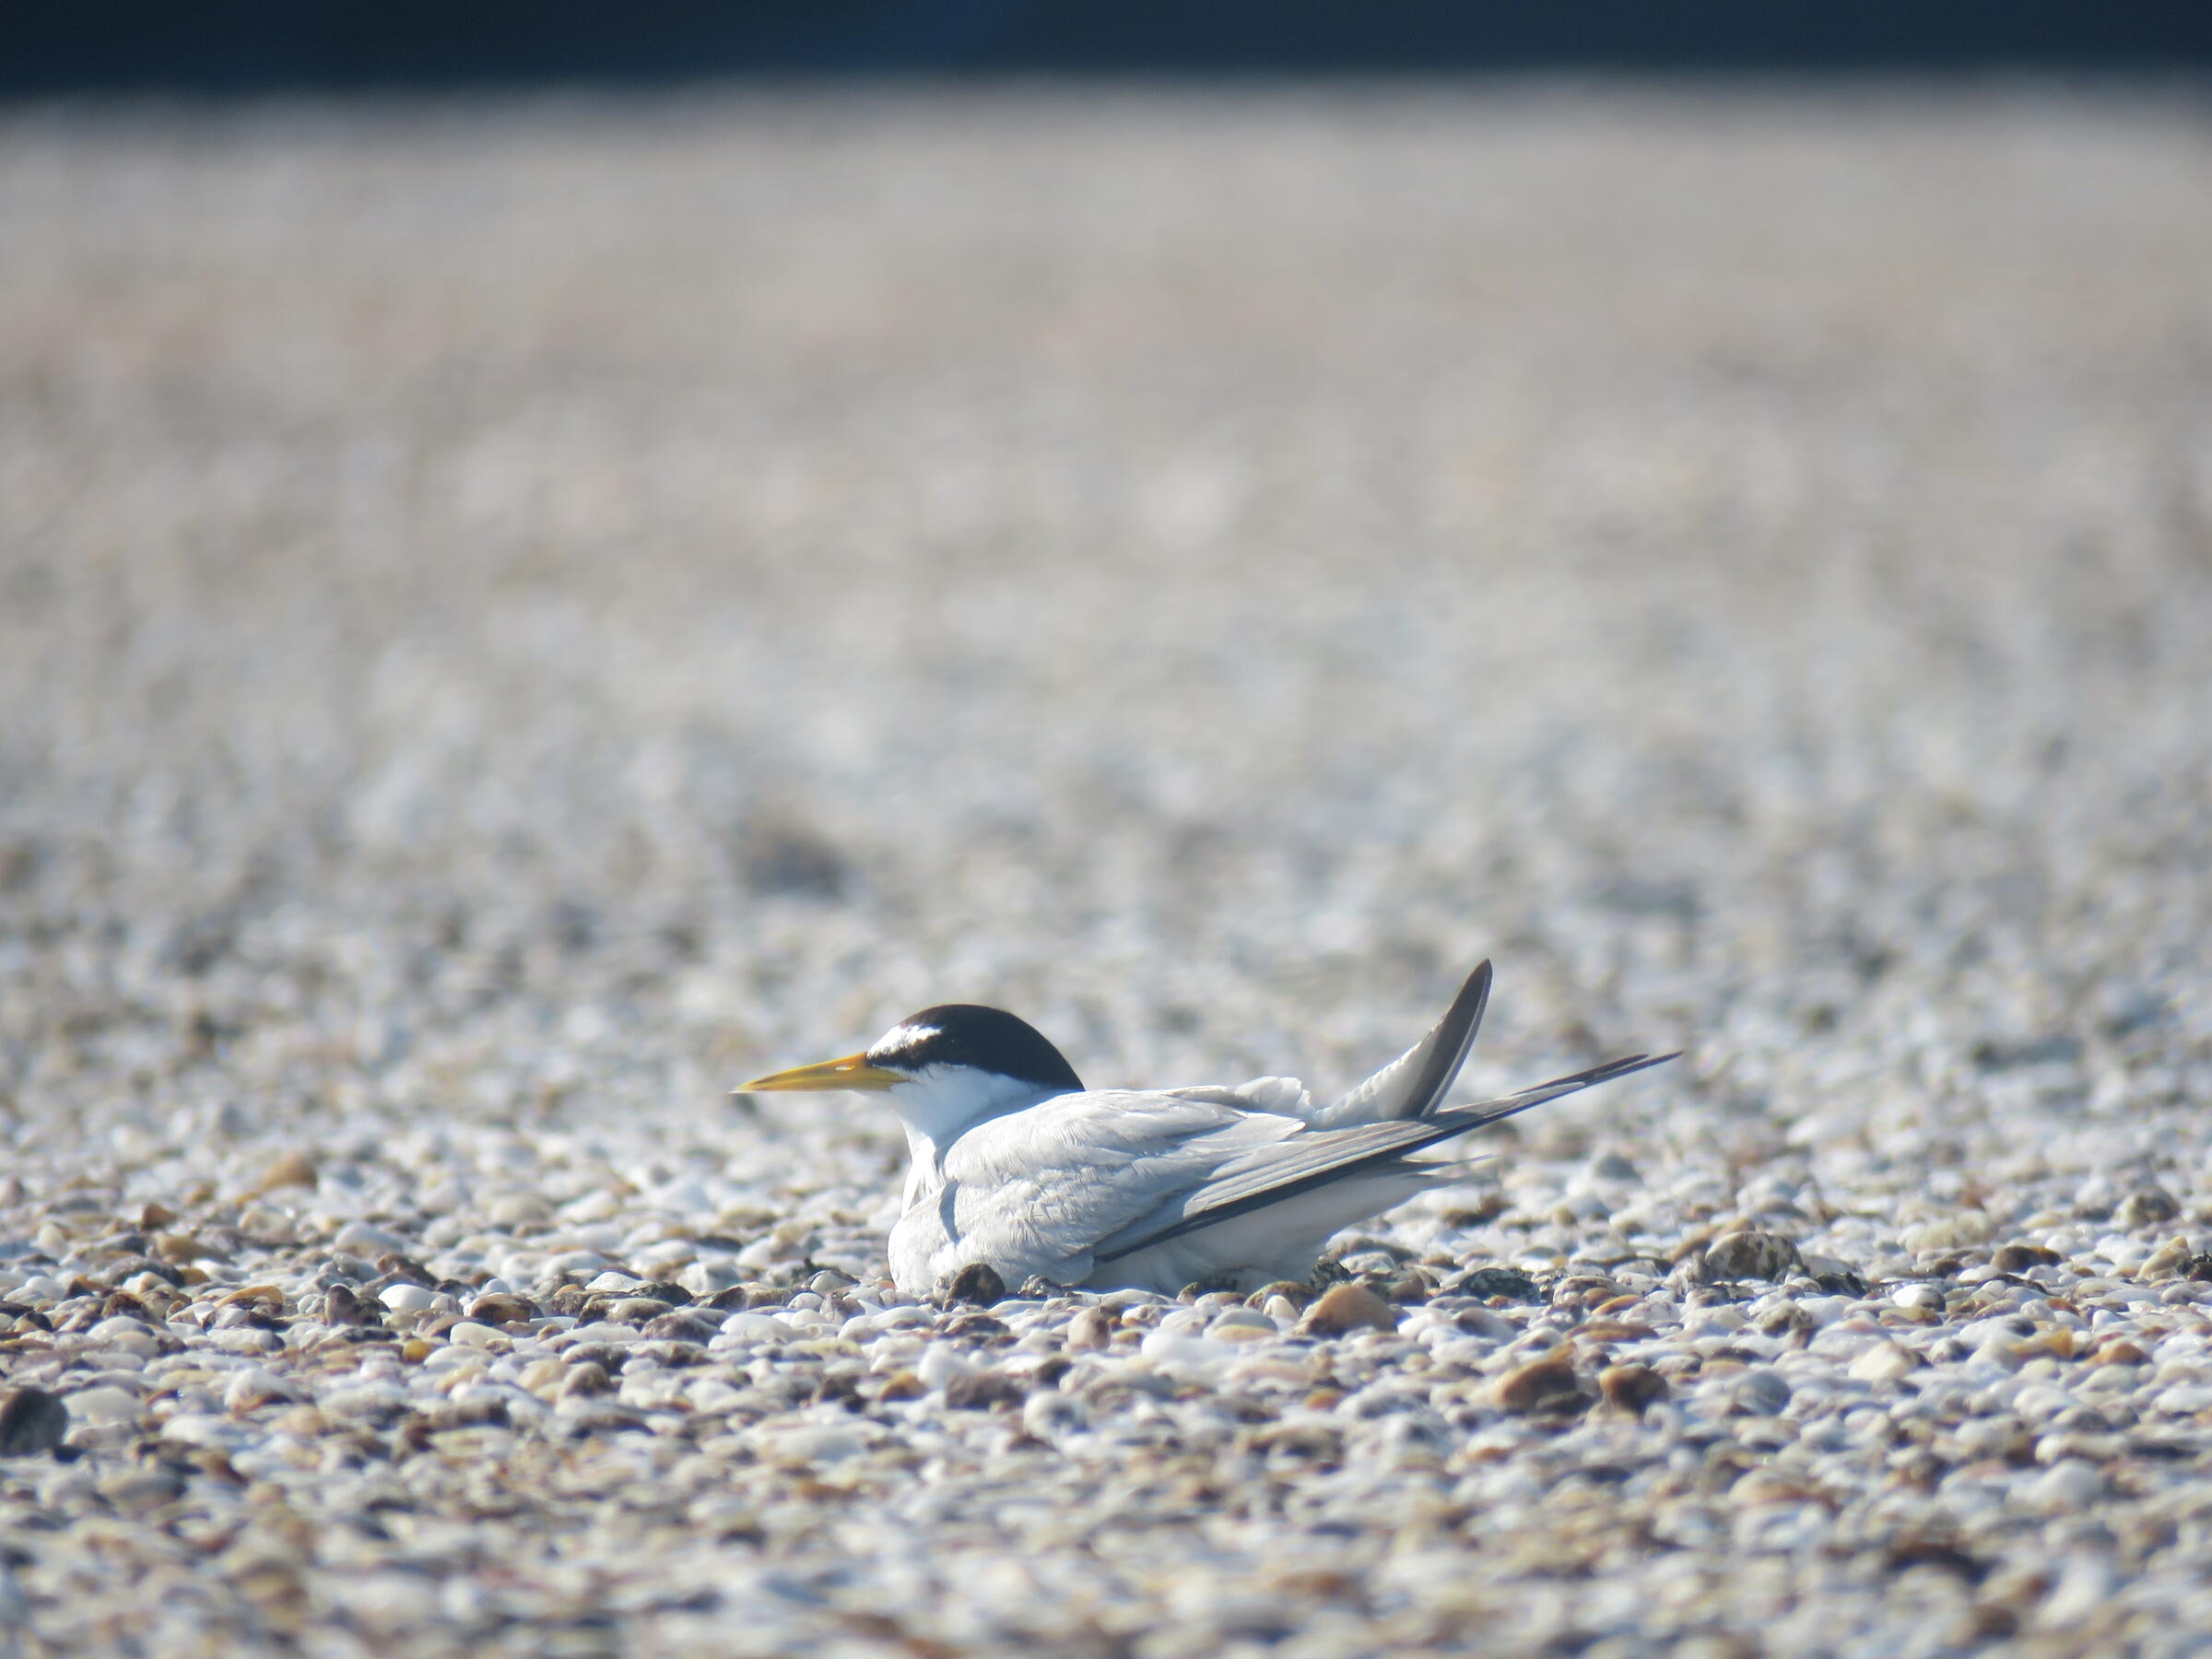 Least Tern nesting on a rooftop. Photo: Rebekah Snyder.